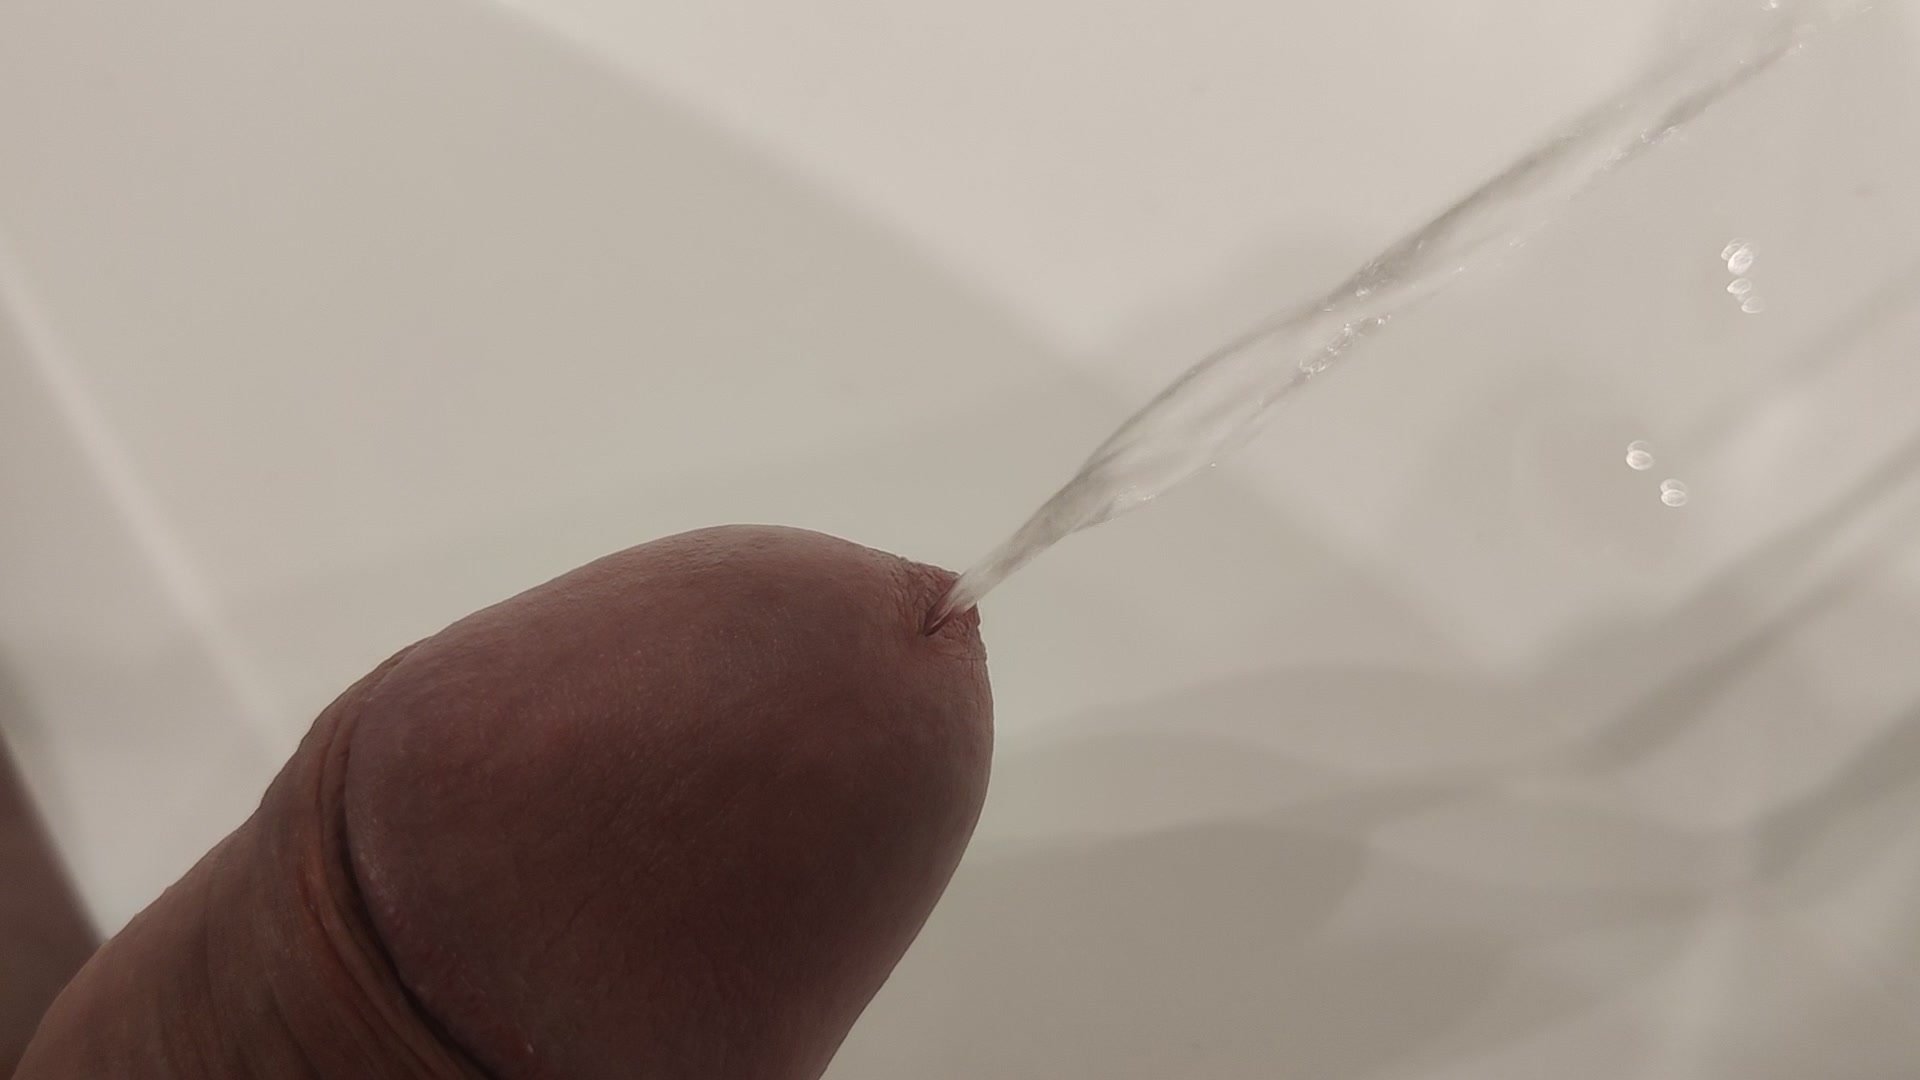 Pissing close up - video 3